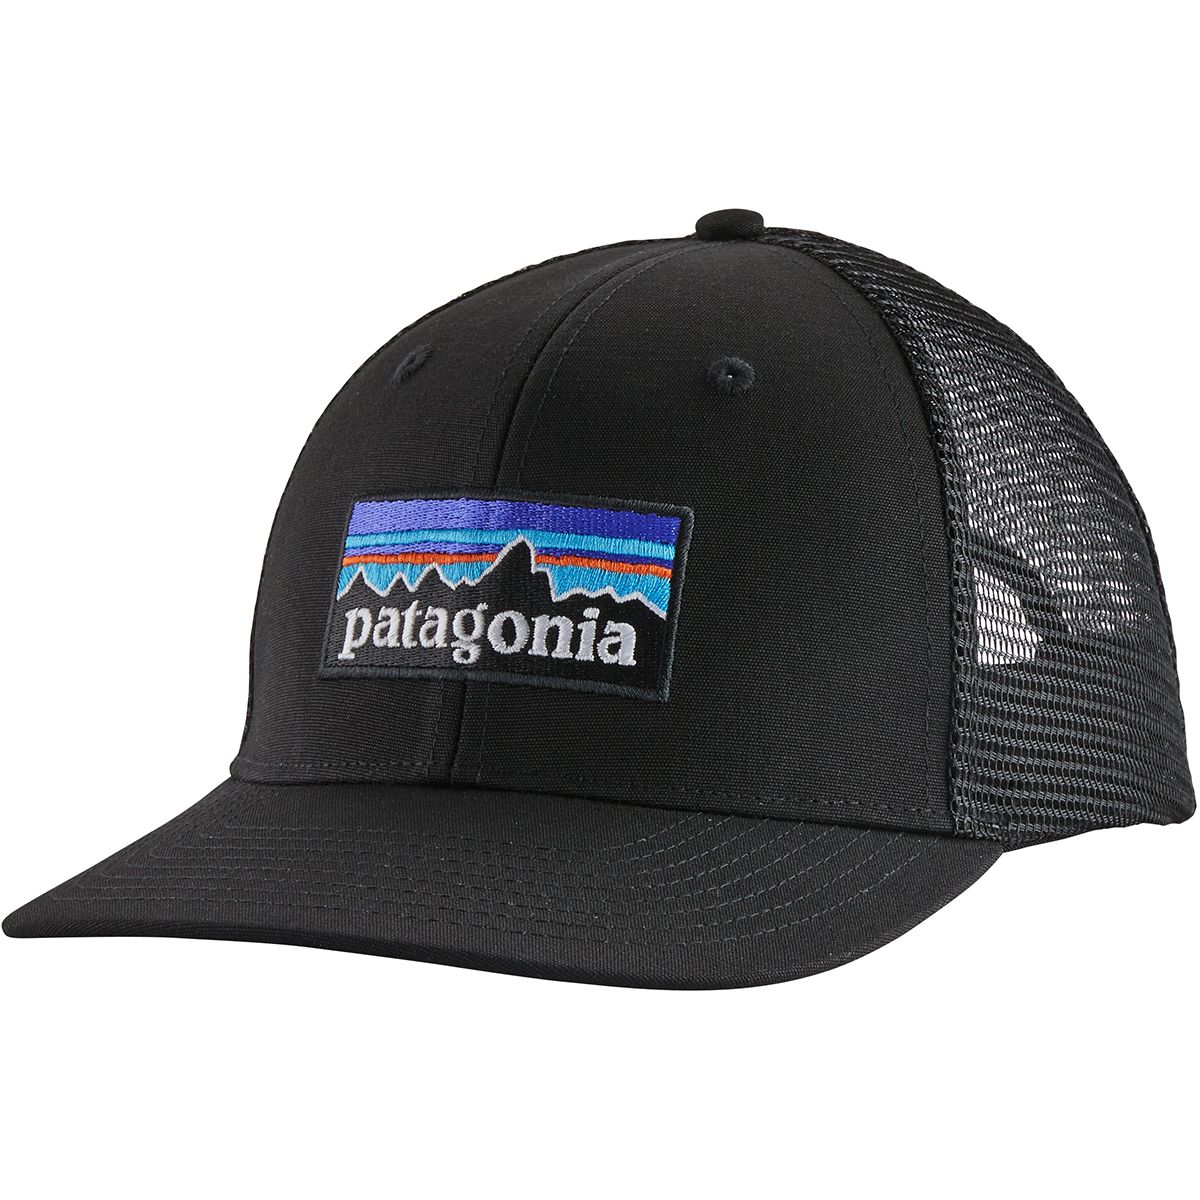 Patagonia P6 Trucker Hat - Accessories | Backcountry